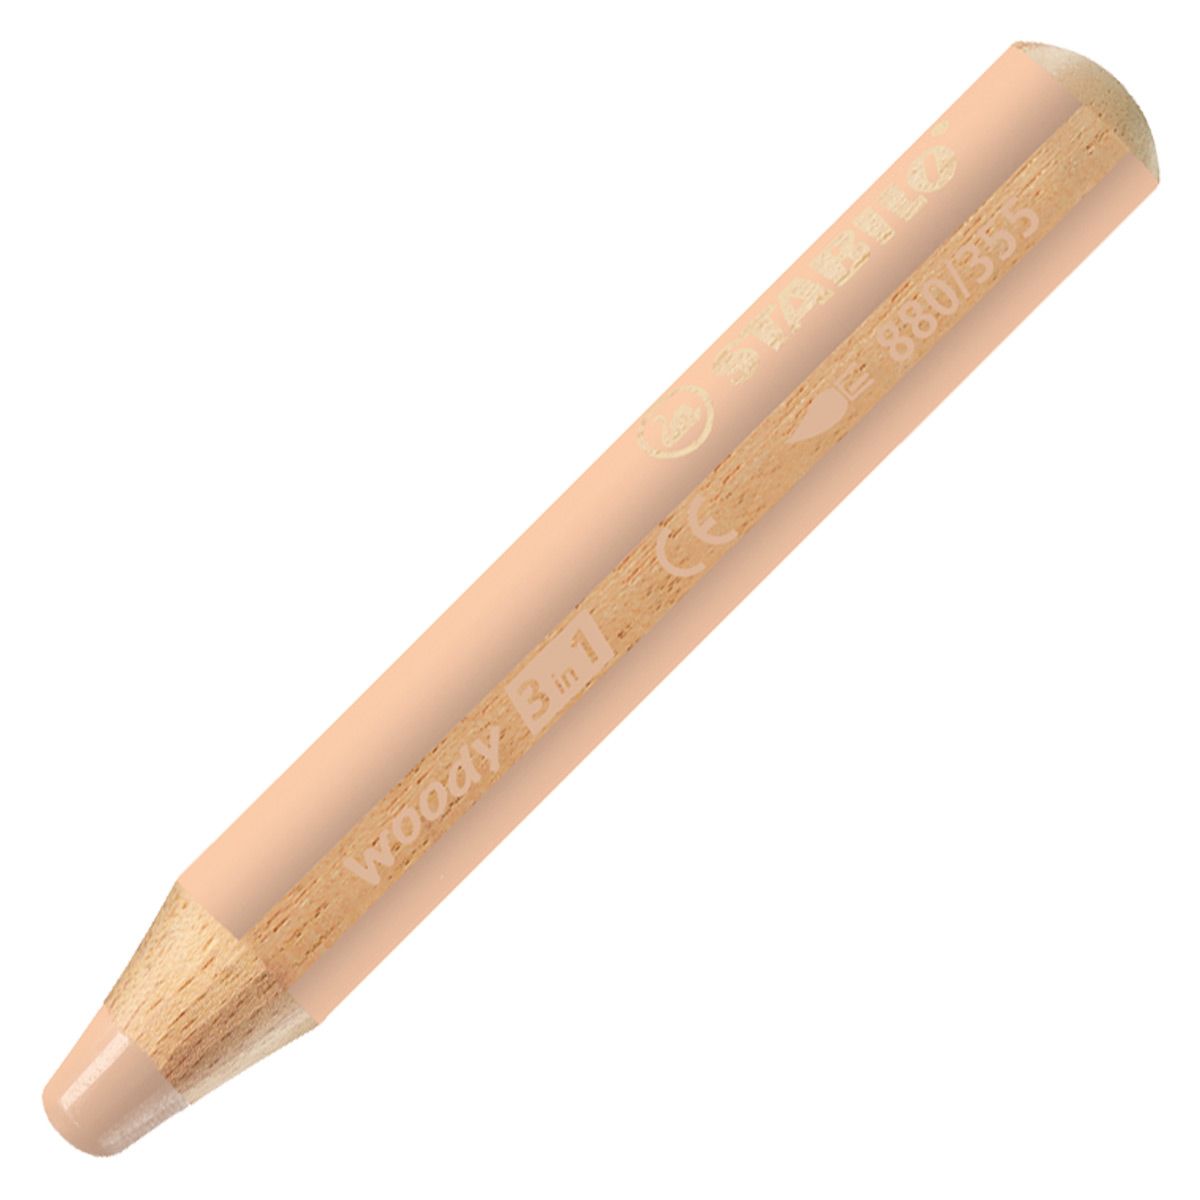 Stabilo Woody Colored Pencil Light Pink